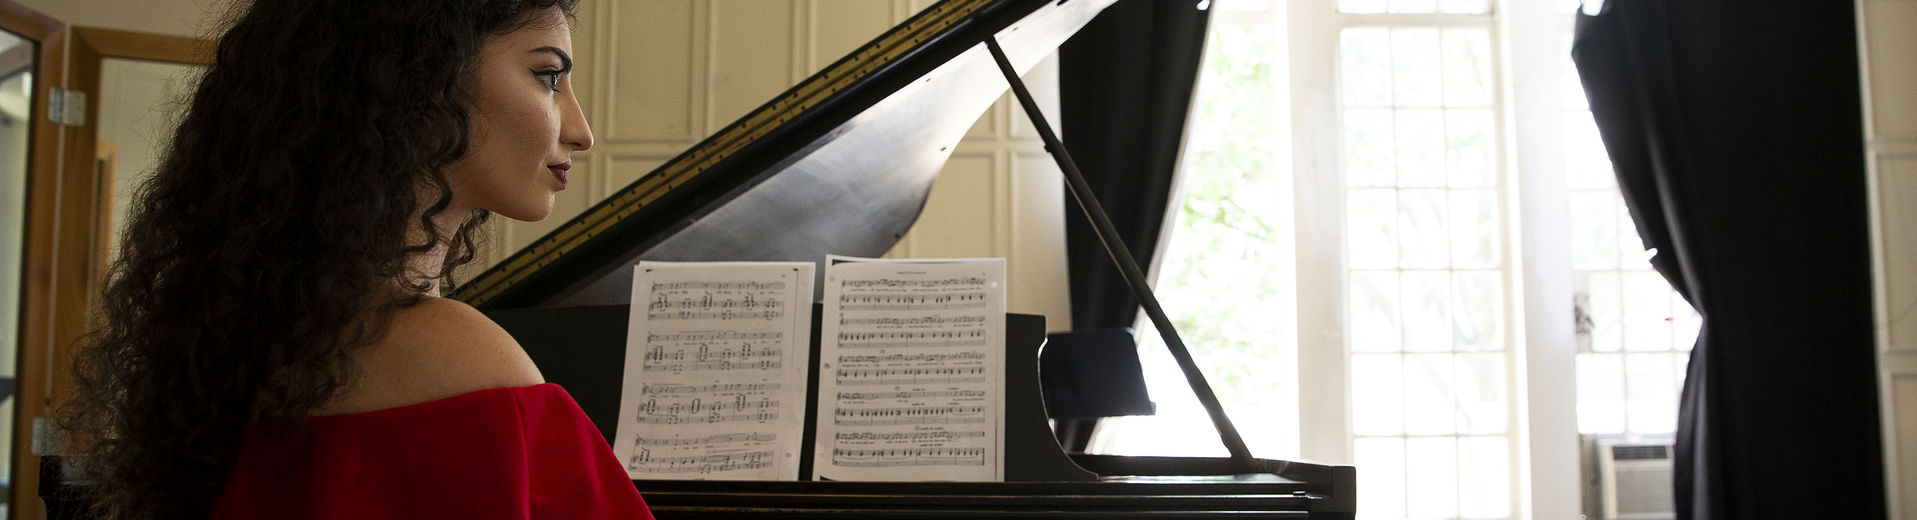 A Boyer student plays piano and sings in one of many rehearsal rooms.